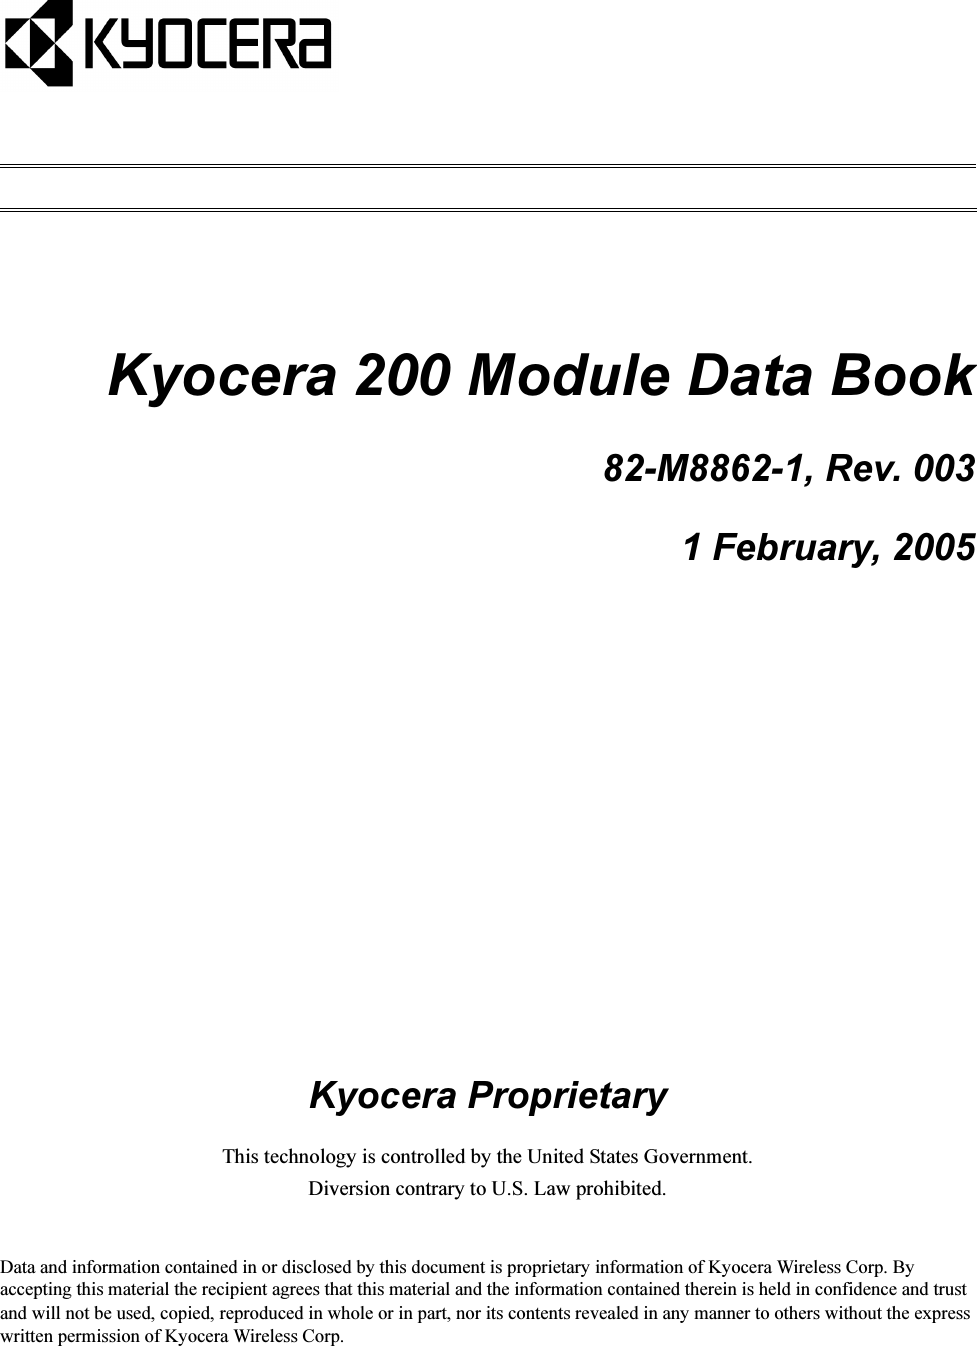 Kyocera 200 Module Data Book82-M8862-1, Rev. 0031 February, 2005Kyocera ProprietaryThis technology is controlled by the United States Government.Diversion contrary to U.S. Law prohibited. Data and information contained in or disclosed by this document is proprietary information of Kyocera Wireless Corp. By accepting this material the recipient agrees that this material and the information contained therein is held in confidence and trust and will not be used, copied, reproduced in whole or in part, nor its contents revealed in any manner to others without the express written permission of Kyocera Wireless Corp.